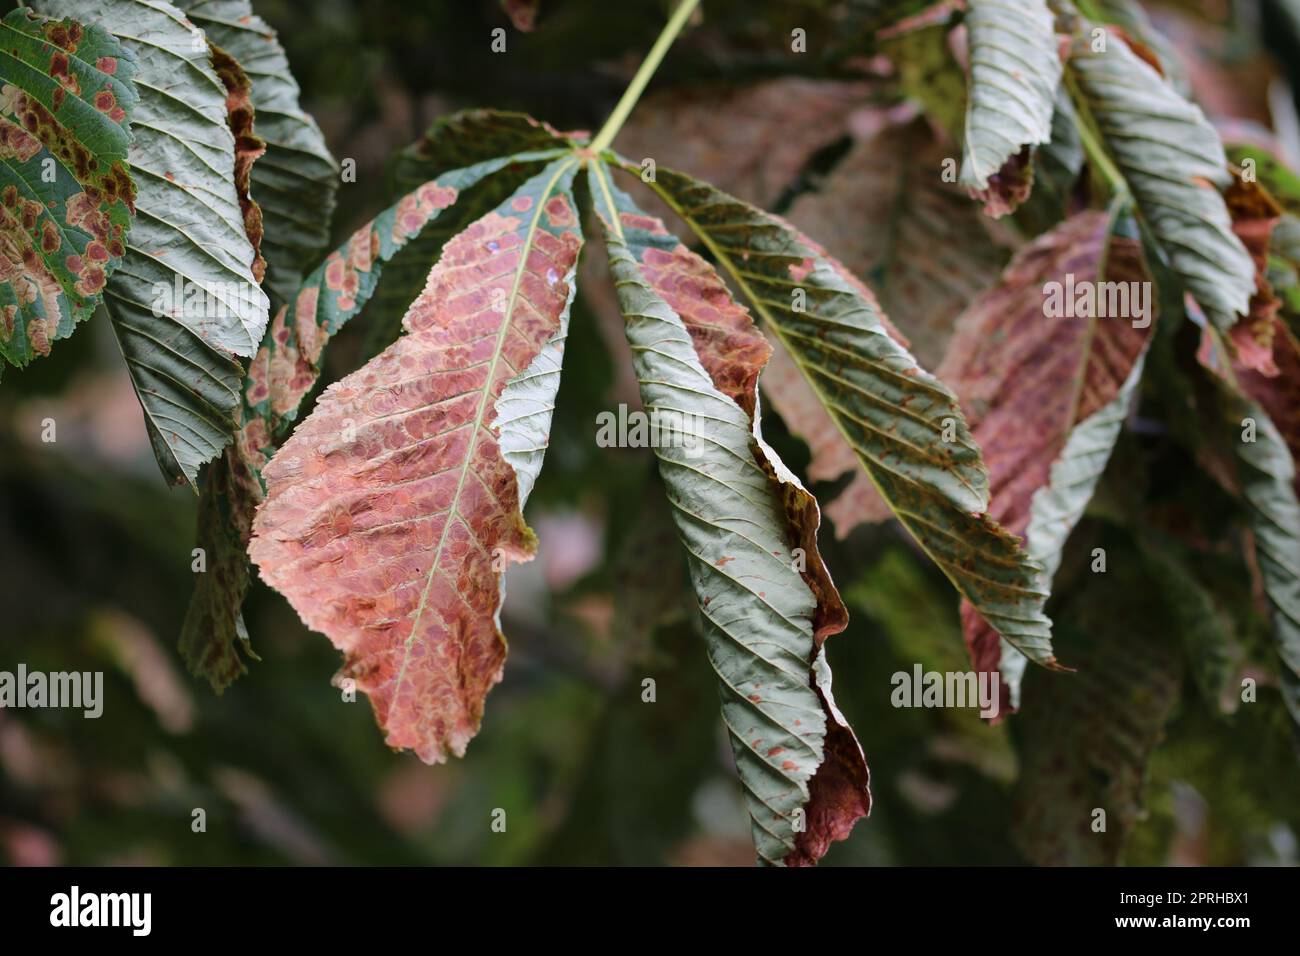 Horse chestnut tree with leaf mining moth mines Stock Photo